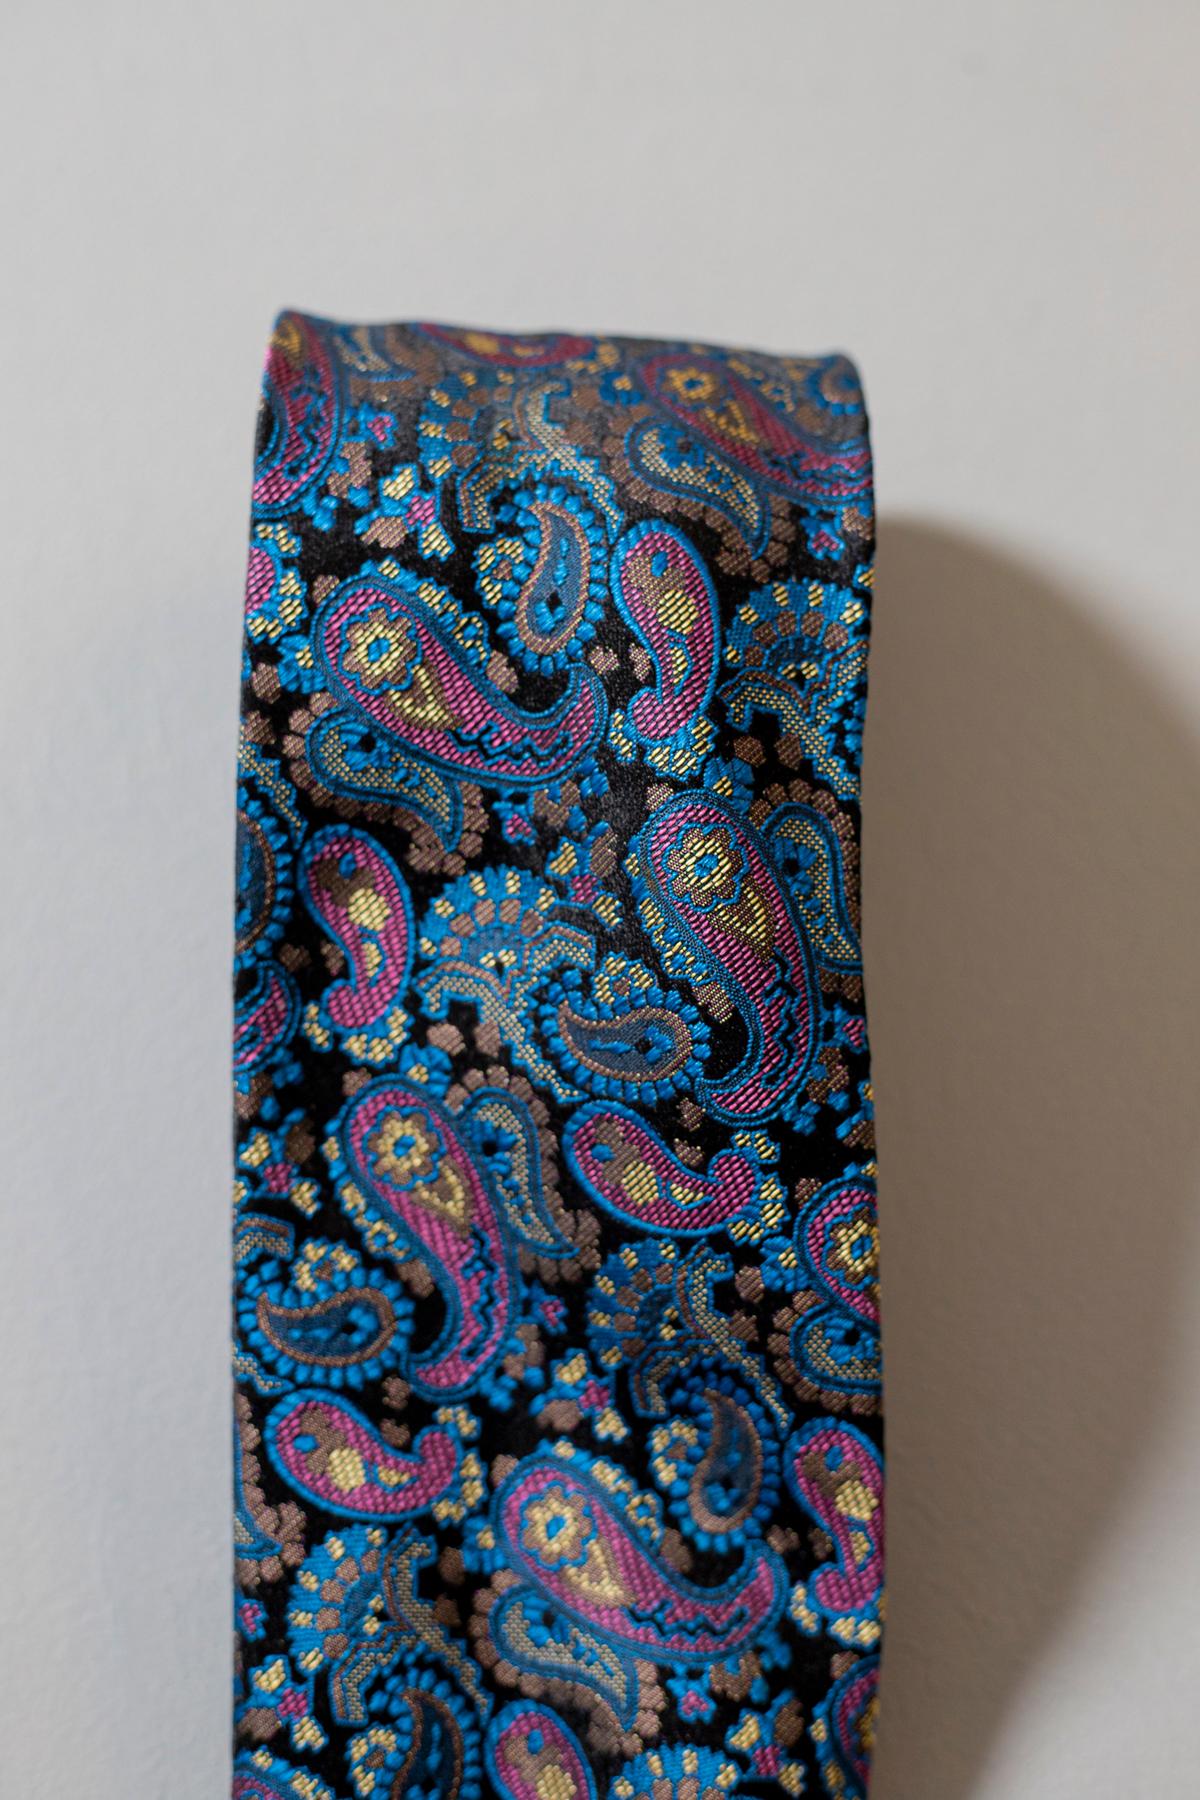 A tie with an inimitable character, designed by the famous Italian designer Gianni Versace. It is made of silk, which is why it is soft and quality. A timeless tie, decorated with paisley motifs in shades of blue and purple. Perfect for lovers of